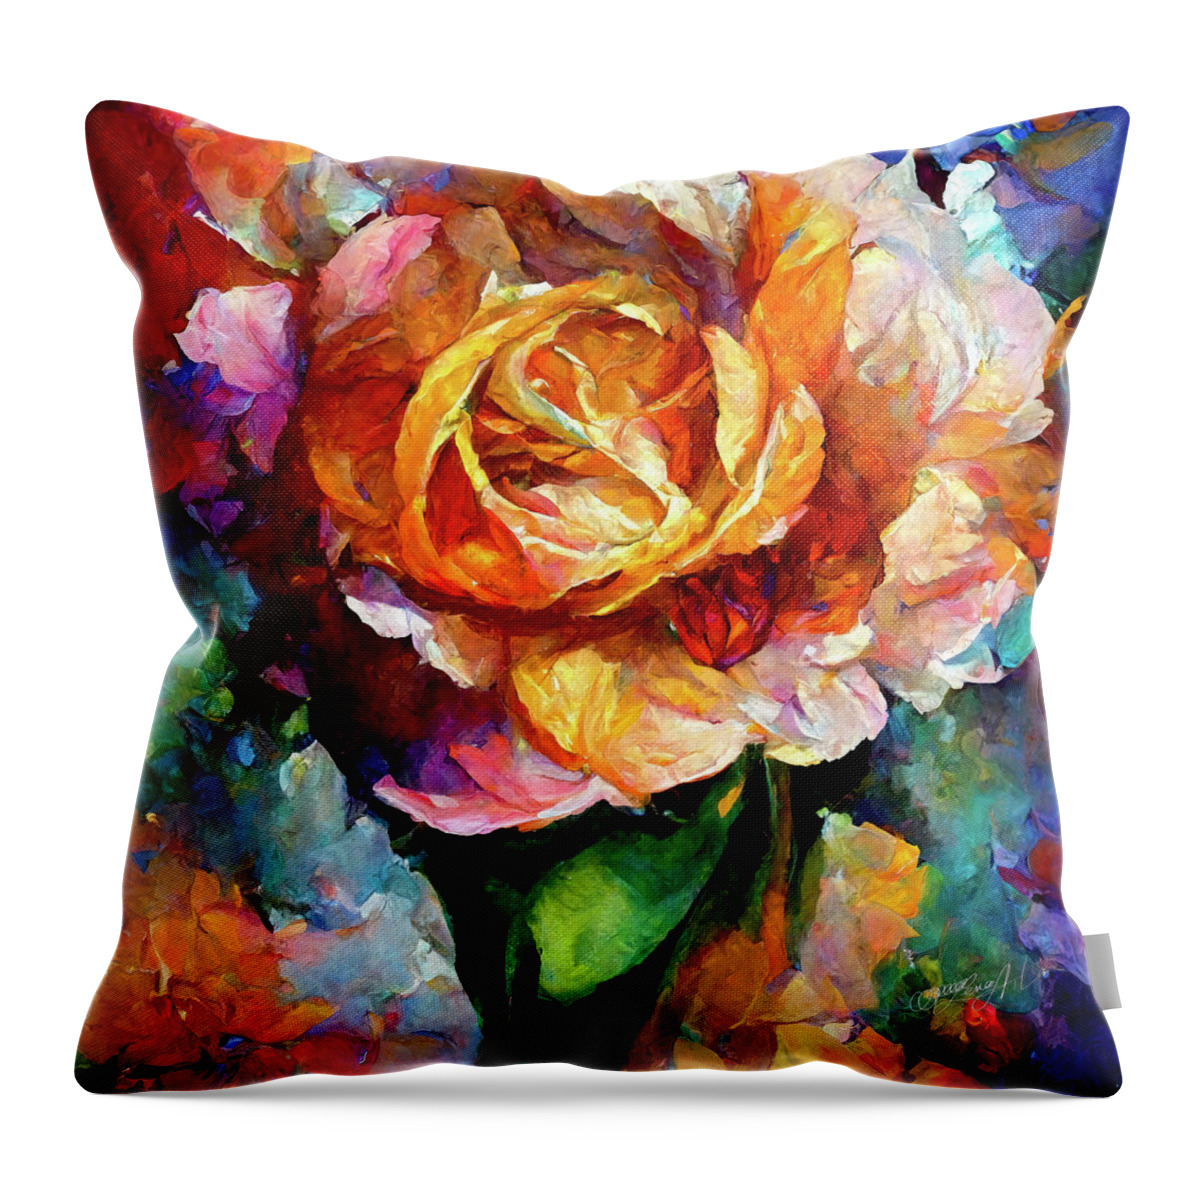 Modernart Throw Pillow featuring the mixed media An English Rose Imaginary World 2 by OLena Art by Lena Owens - Vibrant DESIGN